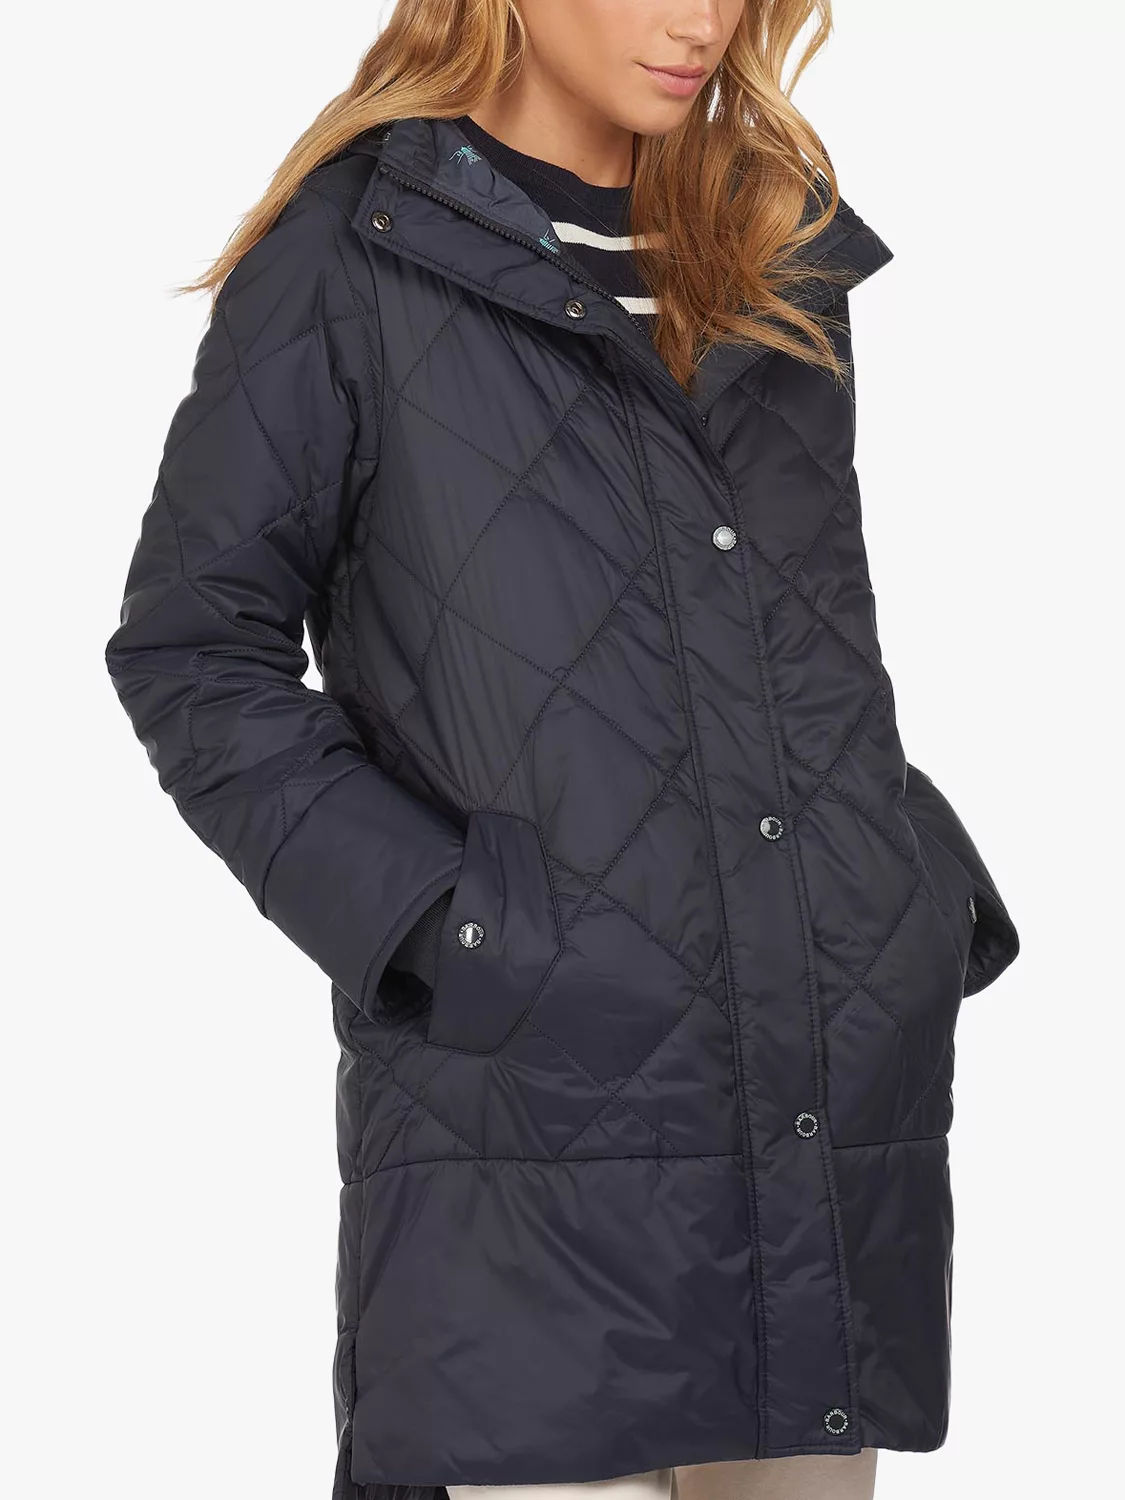 barbour hirsel quilted jacket navy